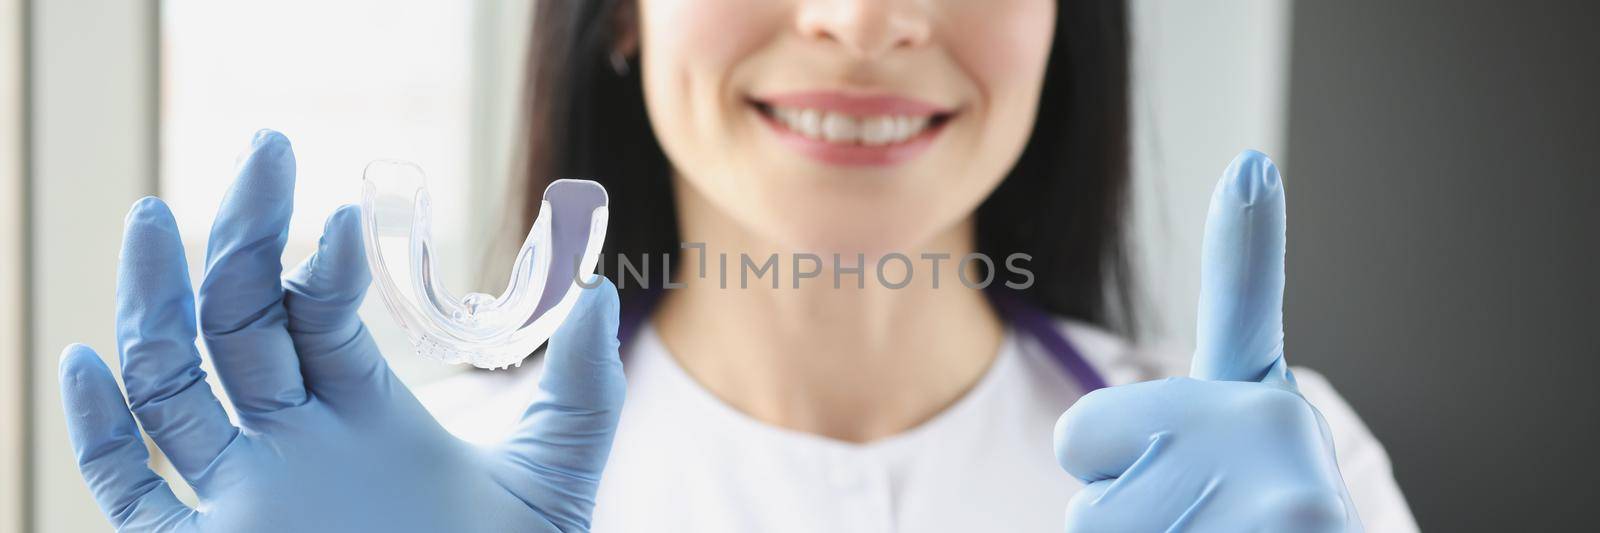 Portrait of stomatologist holding mouthguard for teeth and showing thumb up sign. Dentist at clinic office. Teeth whitening, dental treatment and dentistry concept